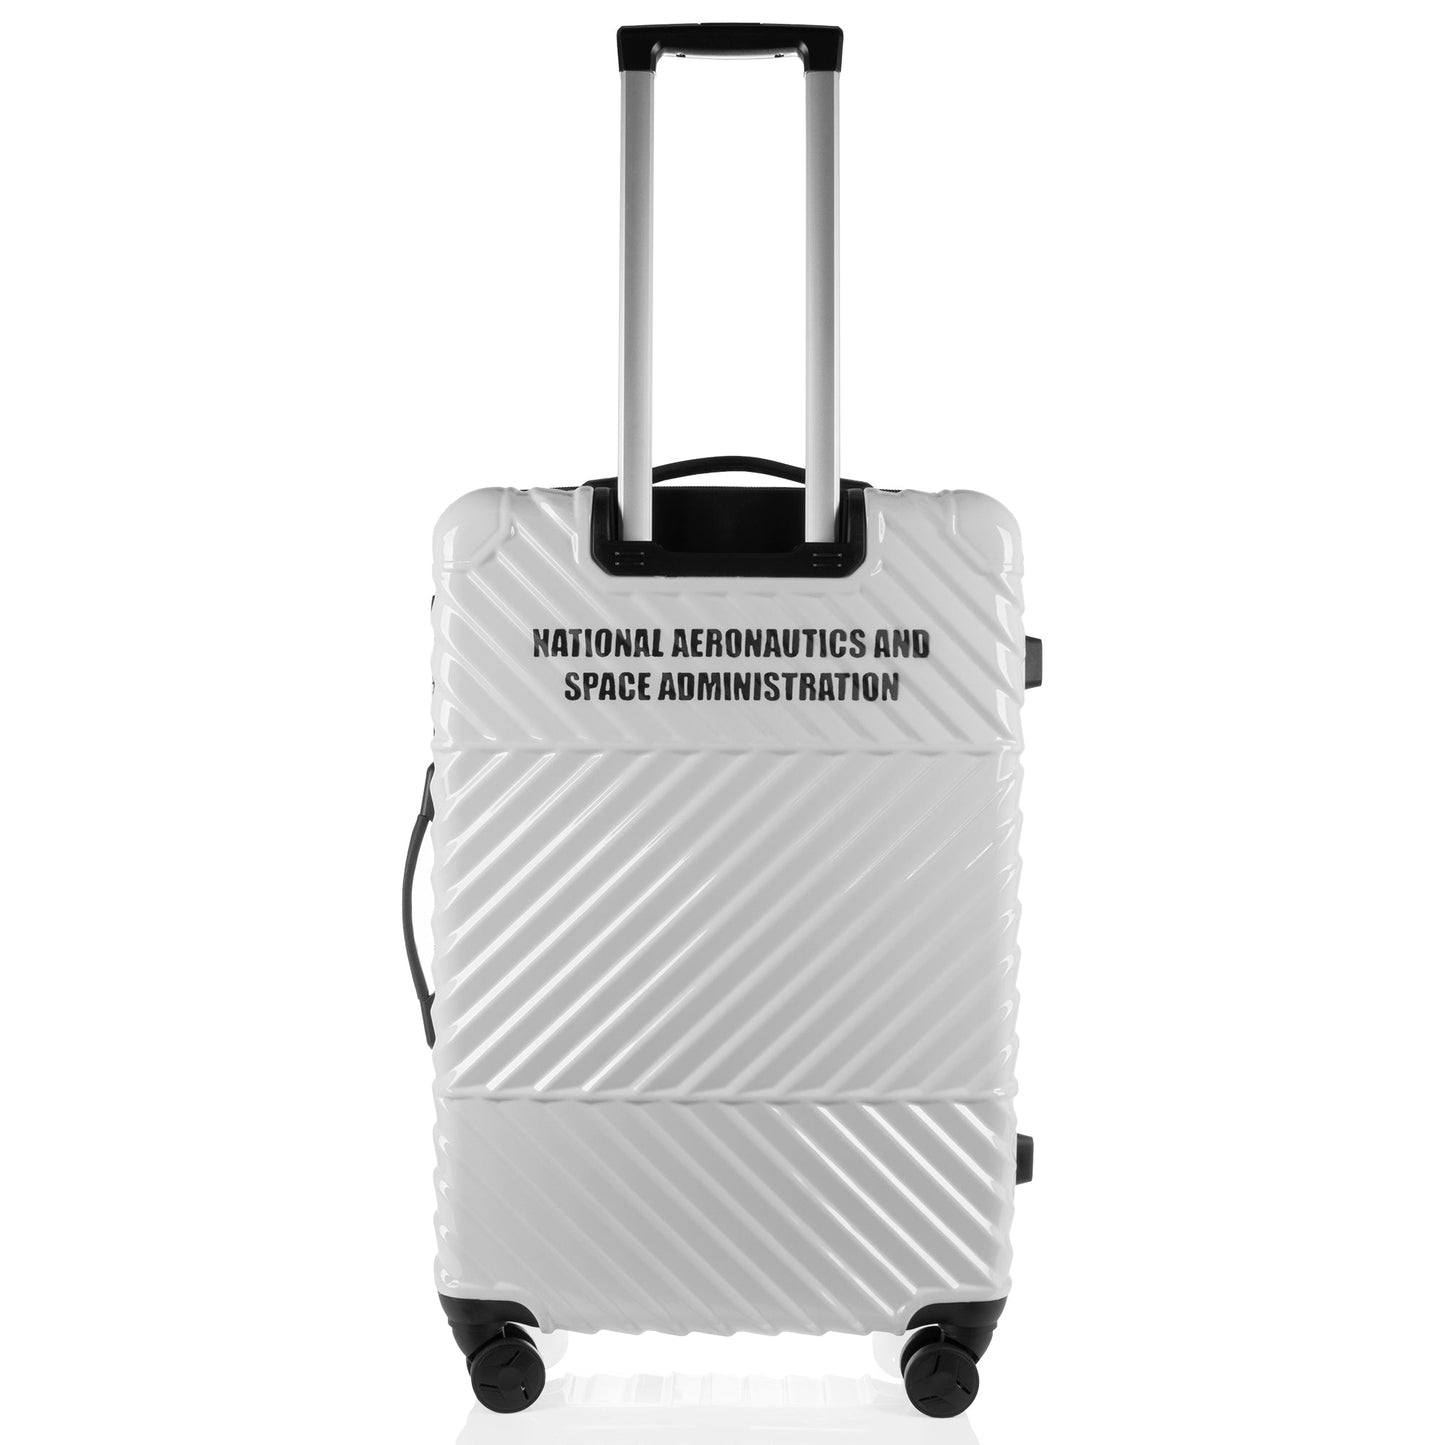 Space shuttle Collection White Luggage (21/25/29") Suitcase Lock Spinner Hardshell